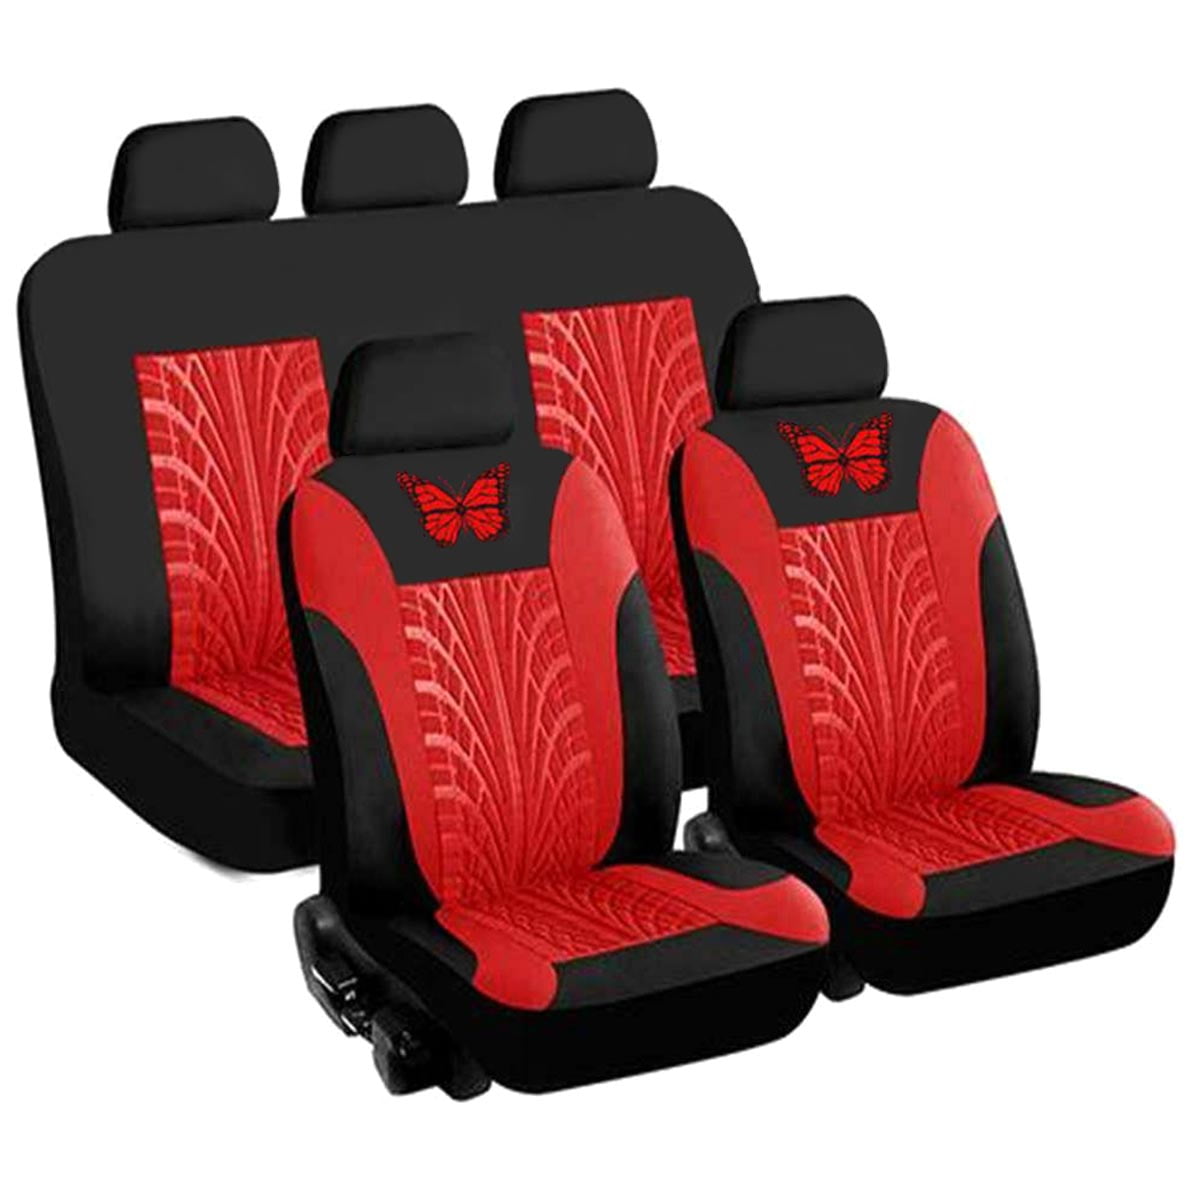 SUV Truck Black Full Set Black Butterfly Embroidery Car Seat Cover 9PCS Car Seat Protectors Fit Most Car or Van 